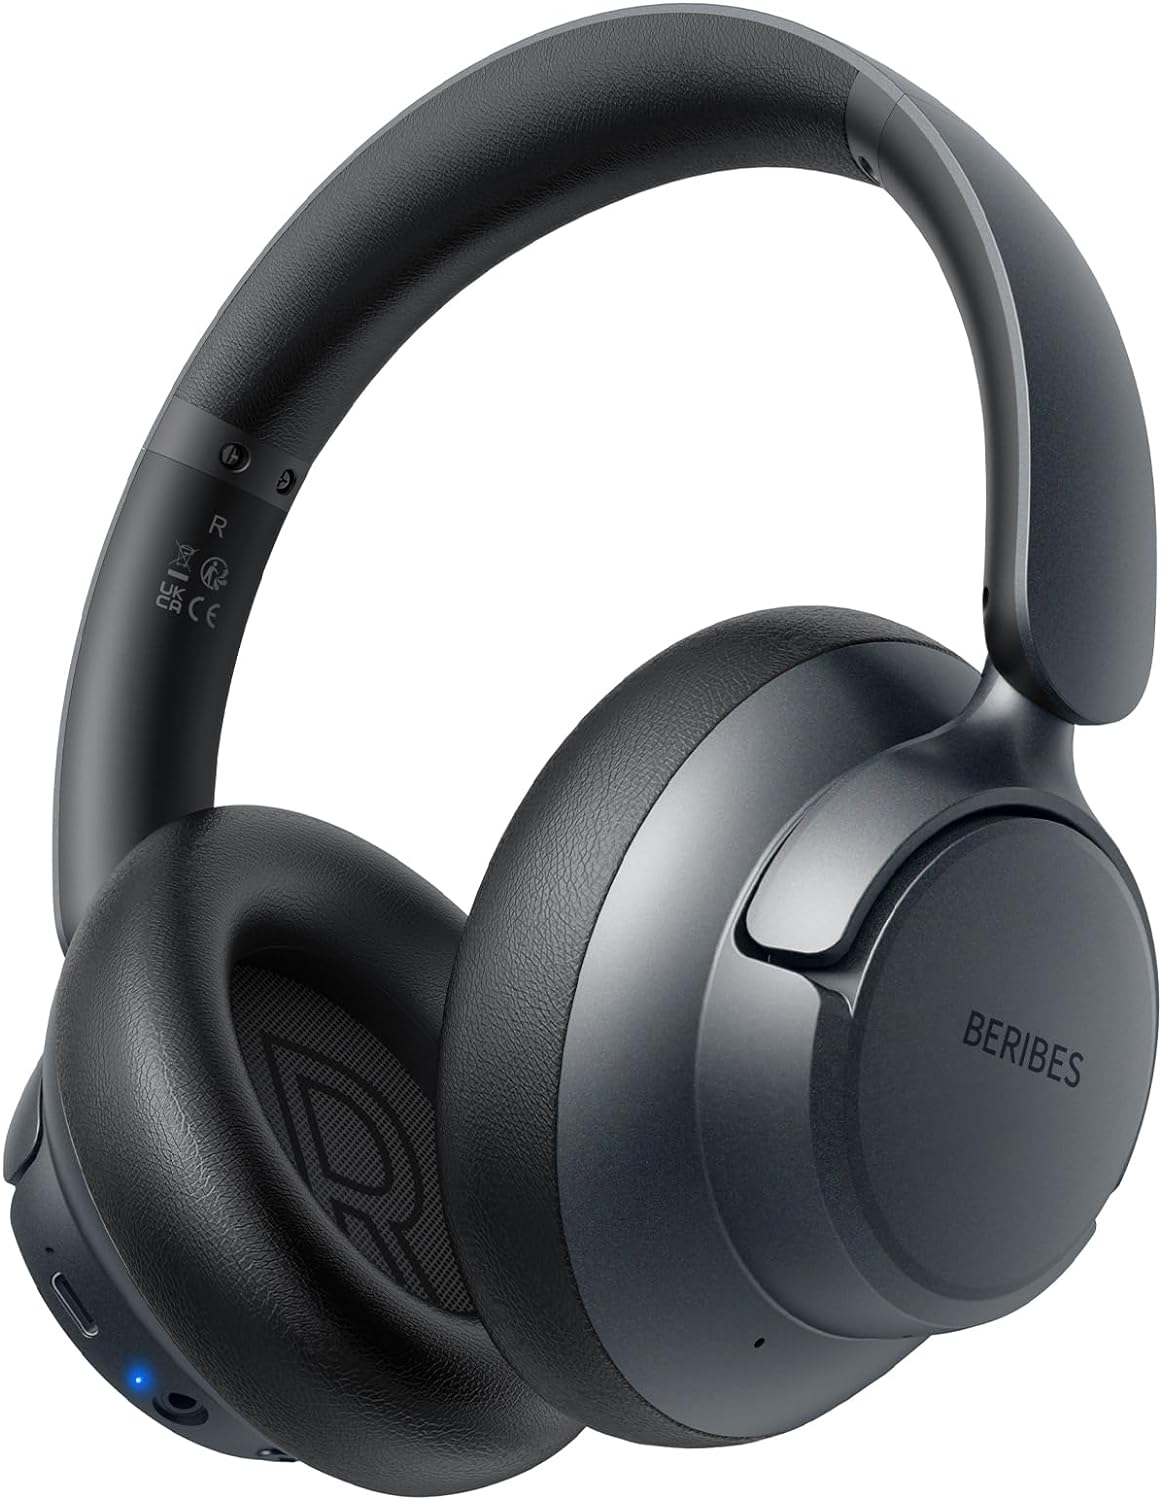 BERIBES Upgraded Hybrid Active Noise Cancelling Headphones with Transparent Modes,70H Playtime Bluetooth Headphones Wireless Bluetooth with Mic, Deep Bass,3.5MM Cable,Soft-Earpads,Fast Charging-Black